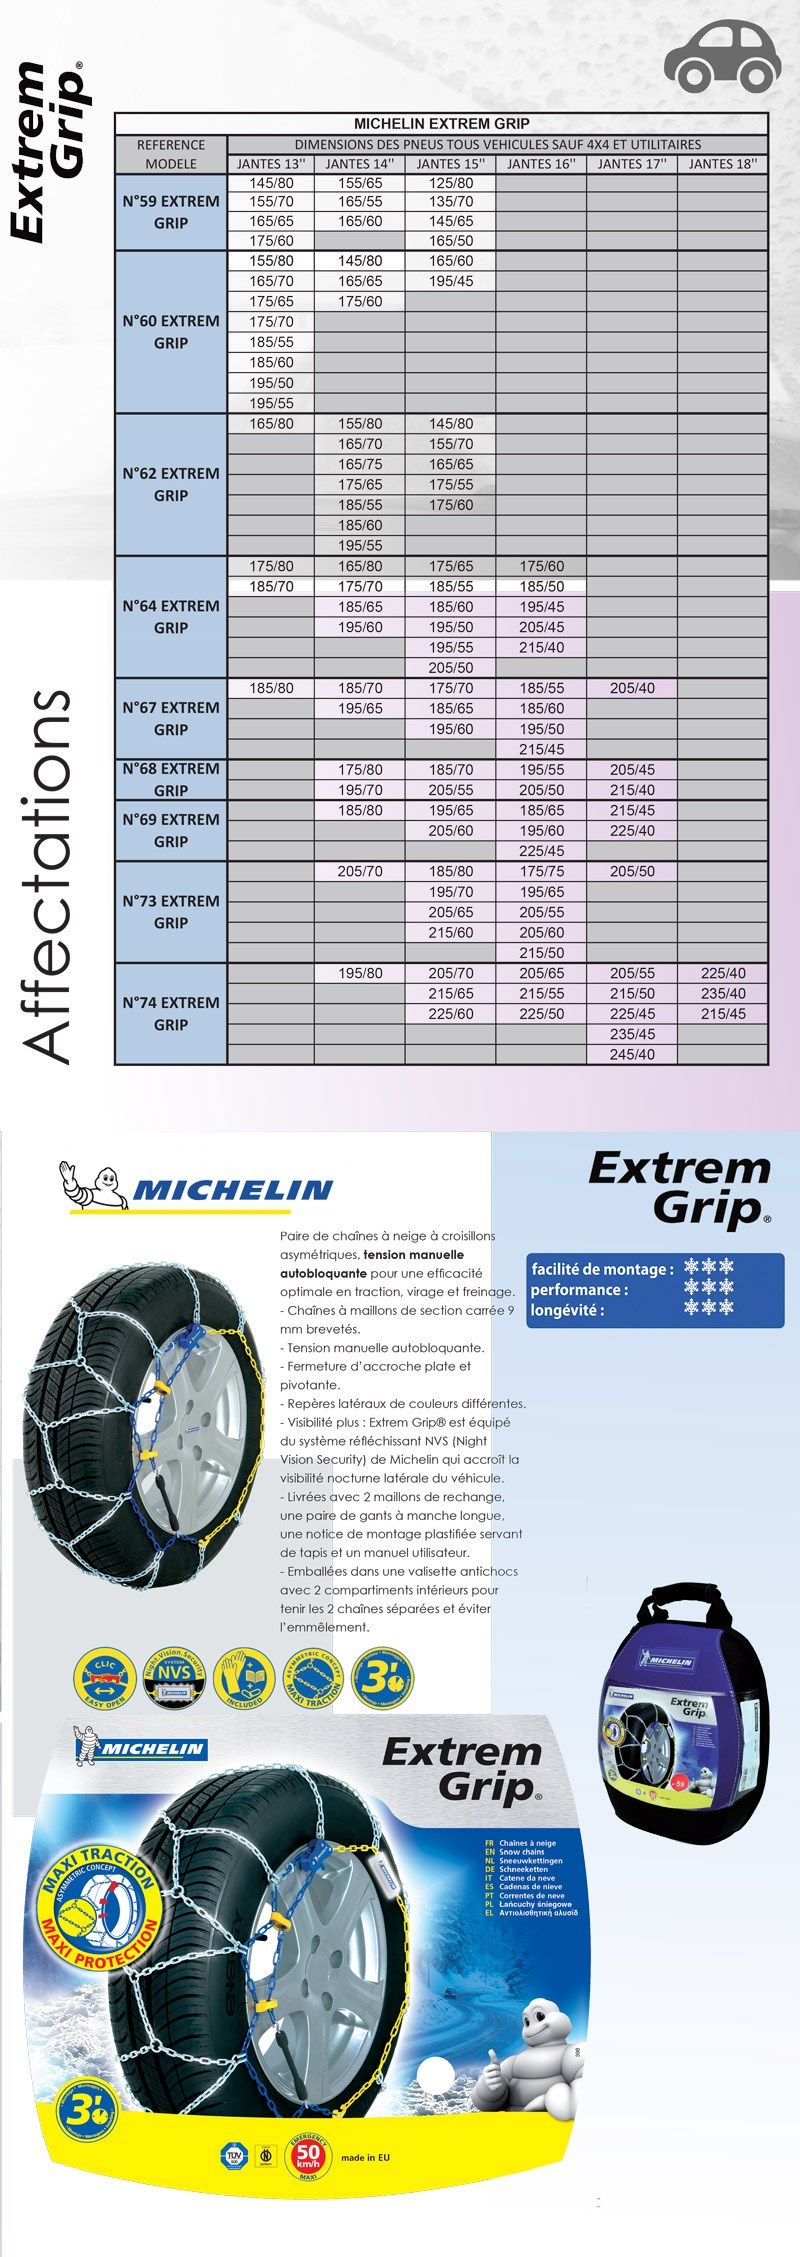 MICHELIN Chaines neige Extrem Grip